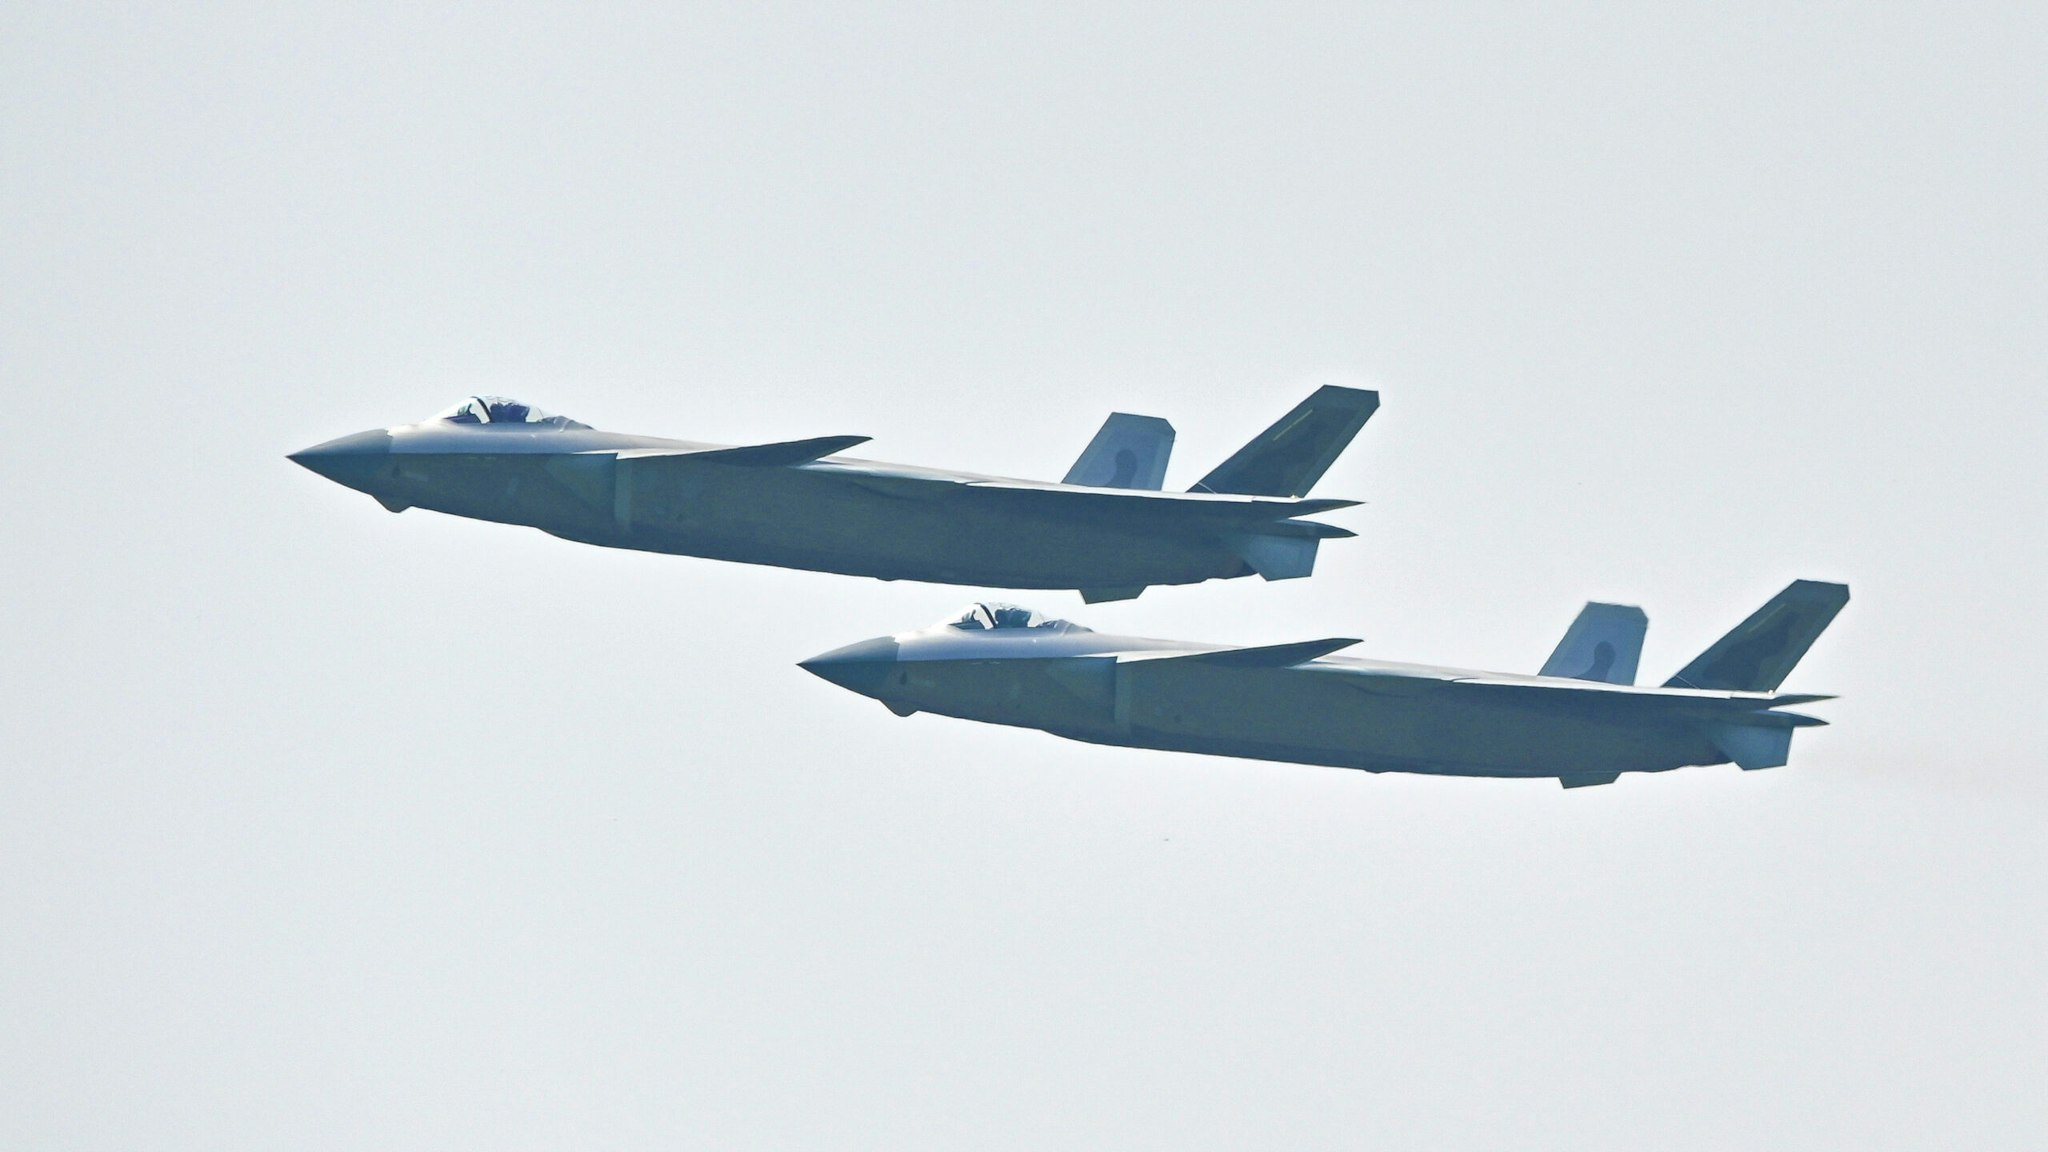 ZHUHAI, CHINA - SEPTEMBER 29: Two J-20 stealth fighter jets perform in the sky during the 13th China International Aviation and Aerospace Exhibition (Airshow China 2021) on September 29, 2021 in Zhuhai, Guangdong Province of China.